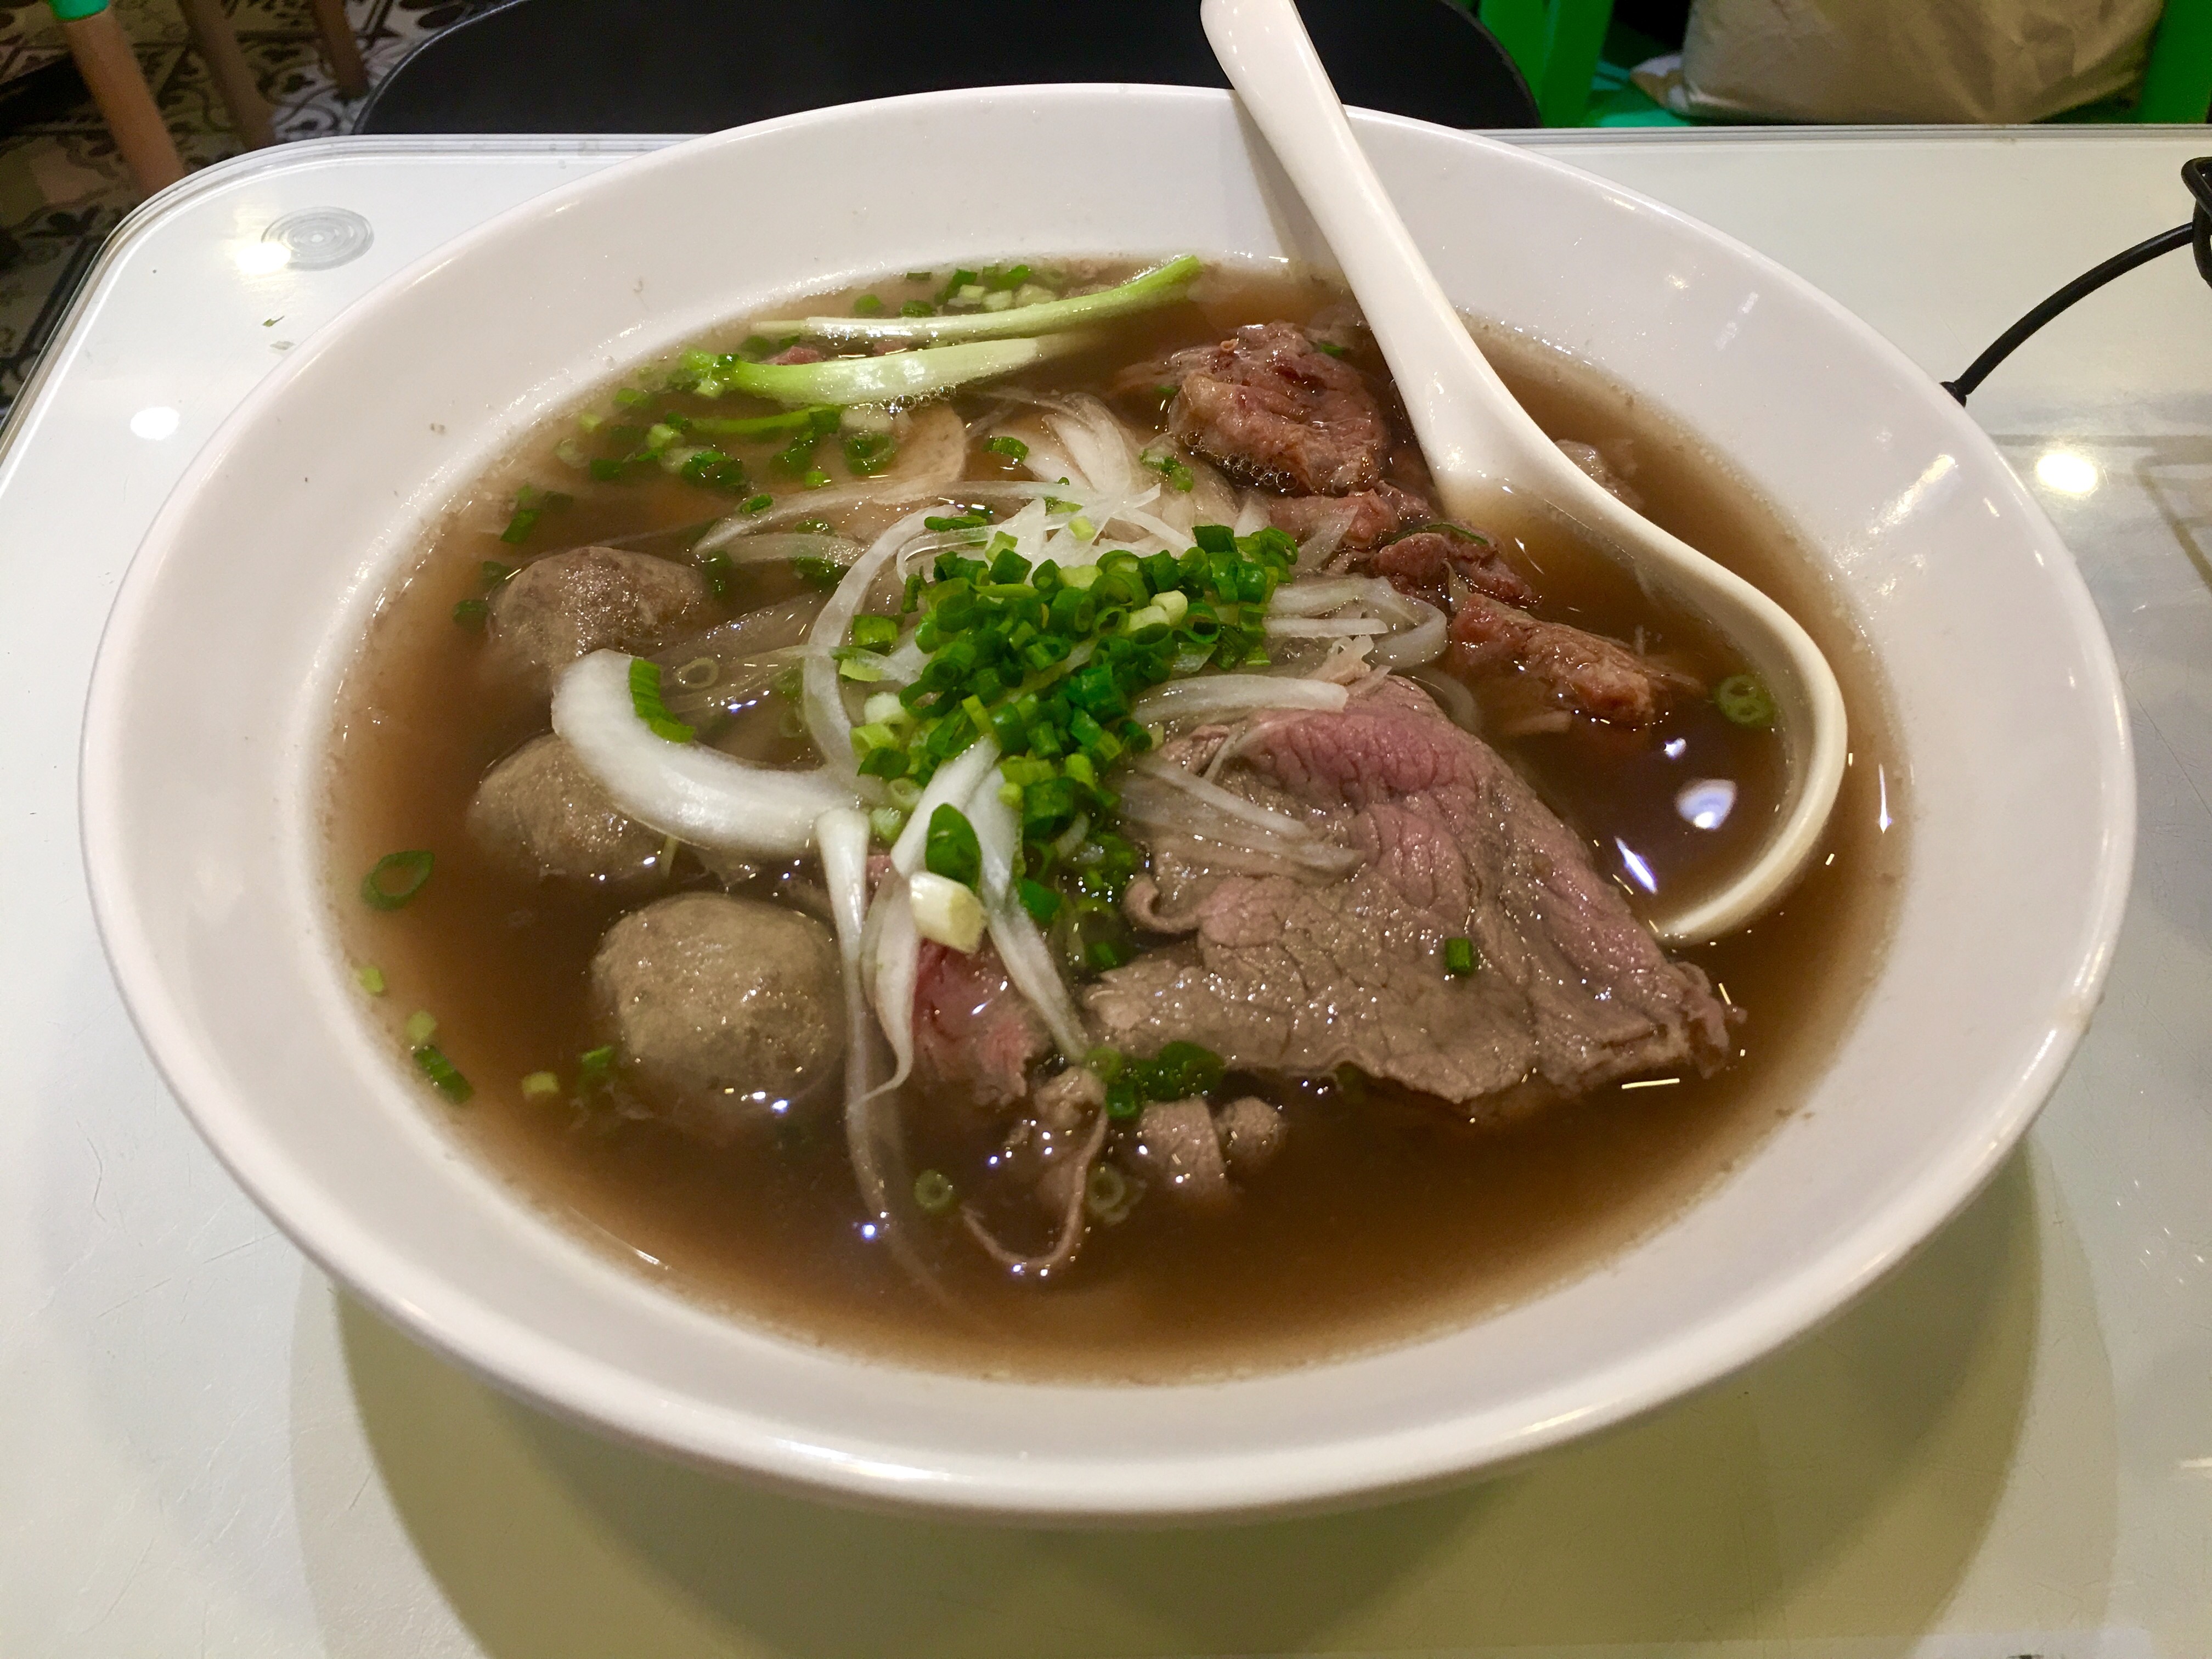 Signature pho (HK$52) with beef slices, beef brisket, beef balls and Vietnamese sausages from Pho 5 in Prince Edward.